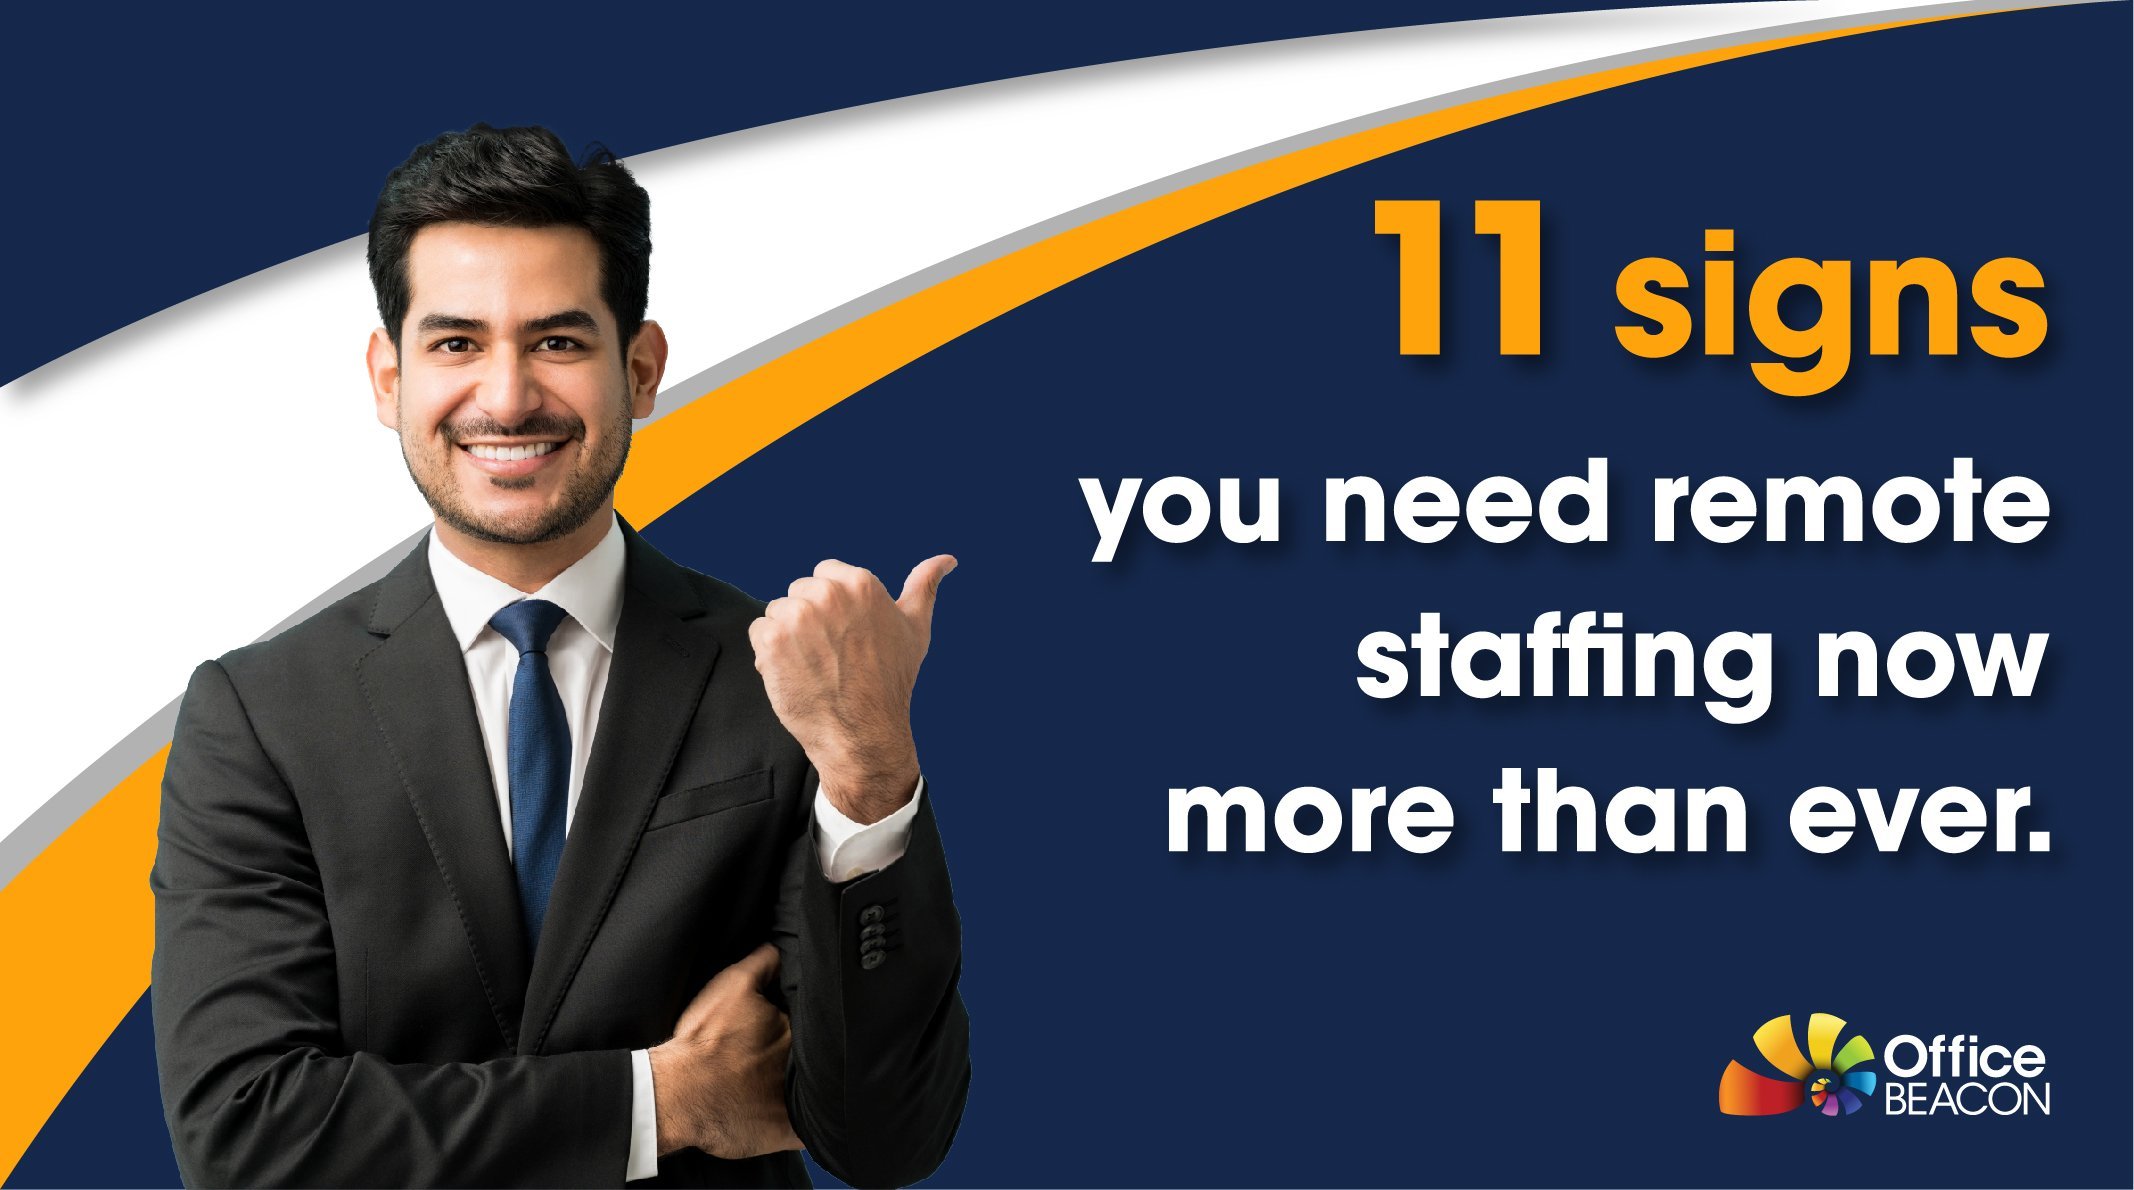 11 signs you need remote staffing now more than ever